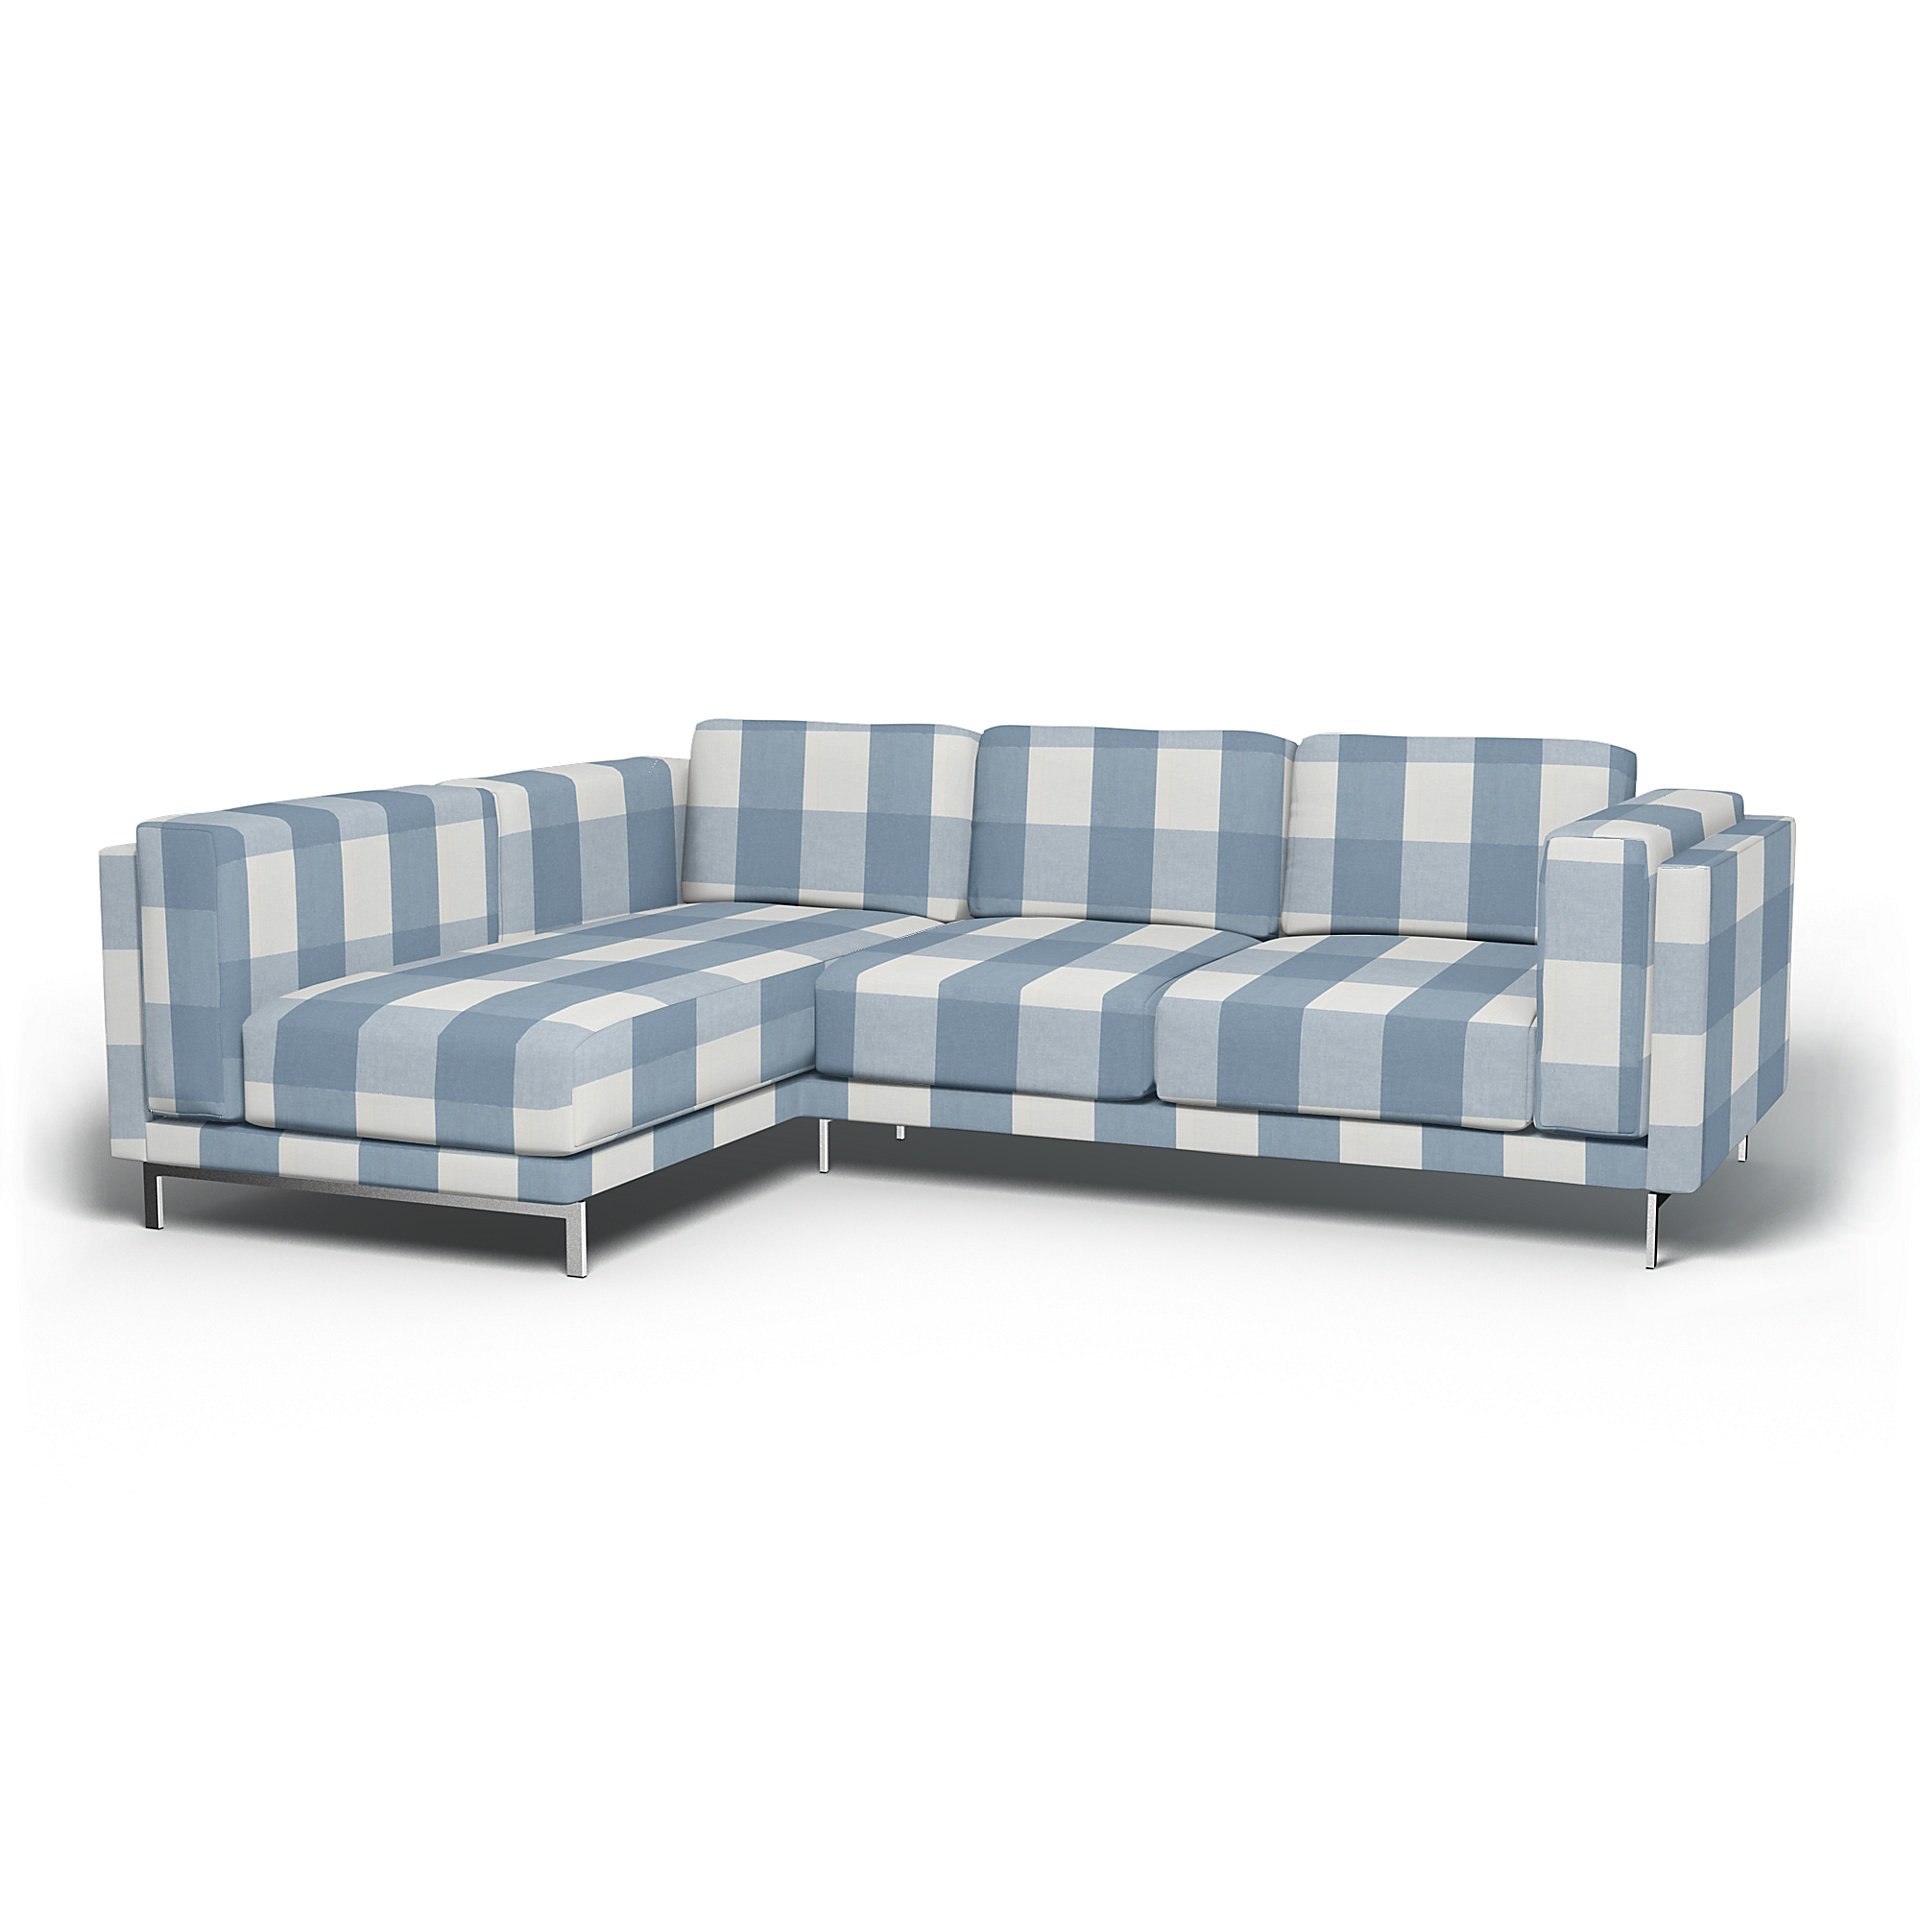 IKEA - Nockeby 3 Seater Sofa with Left Chaise Cover, Sky Blue, Linen - Bemz